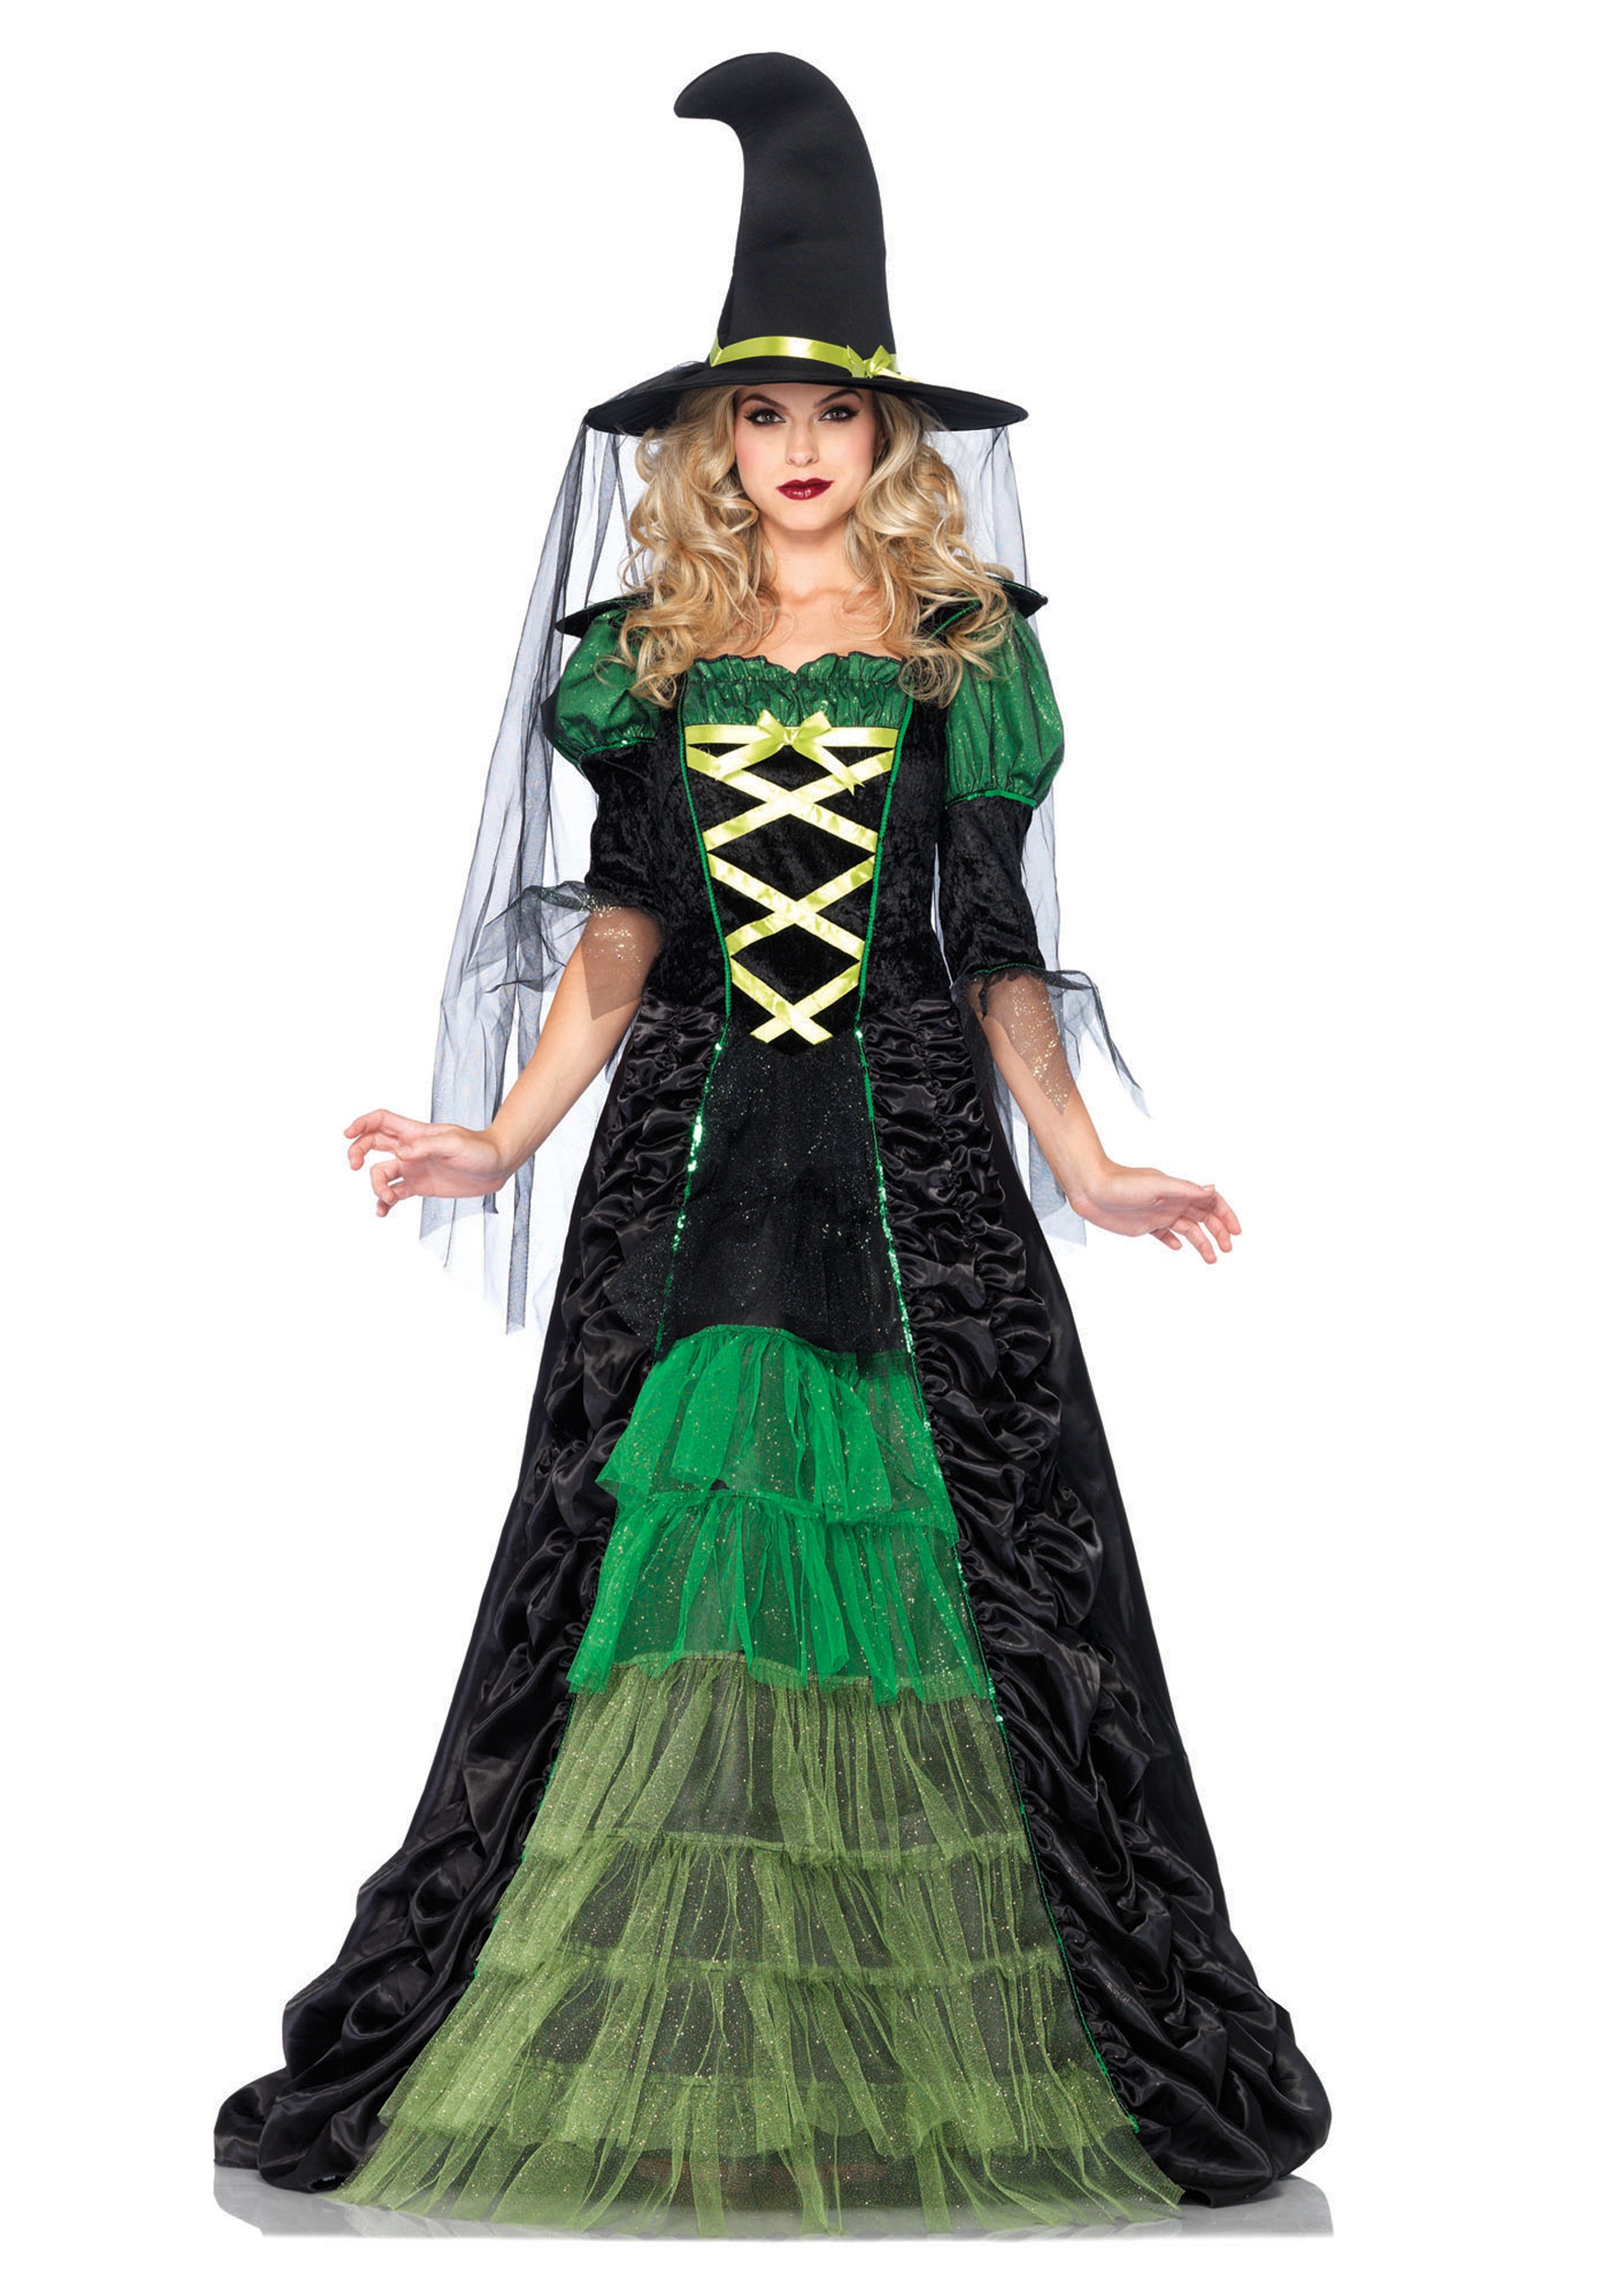 Photos - Fancy Dress MKW Leg Avenue Storybook Witch Costume for Women Black/Green LE85240 